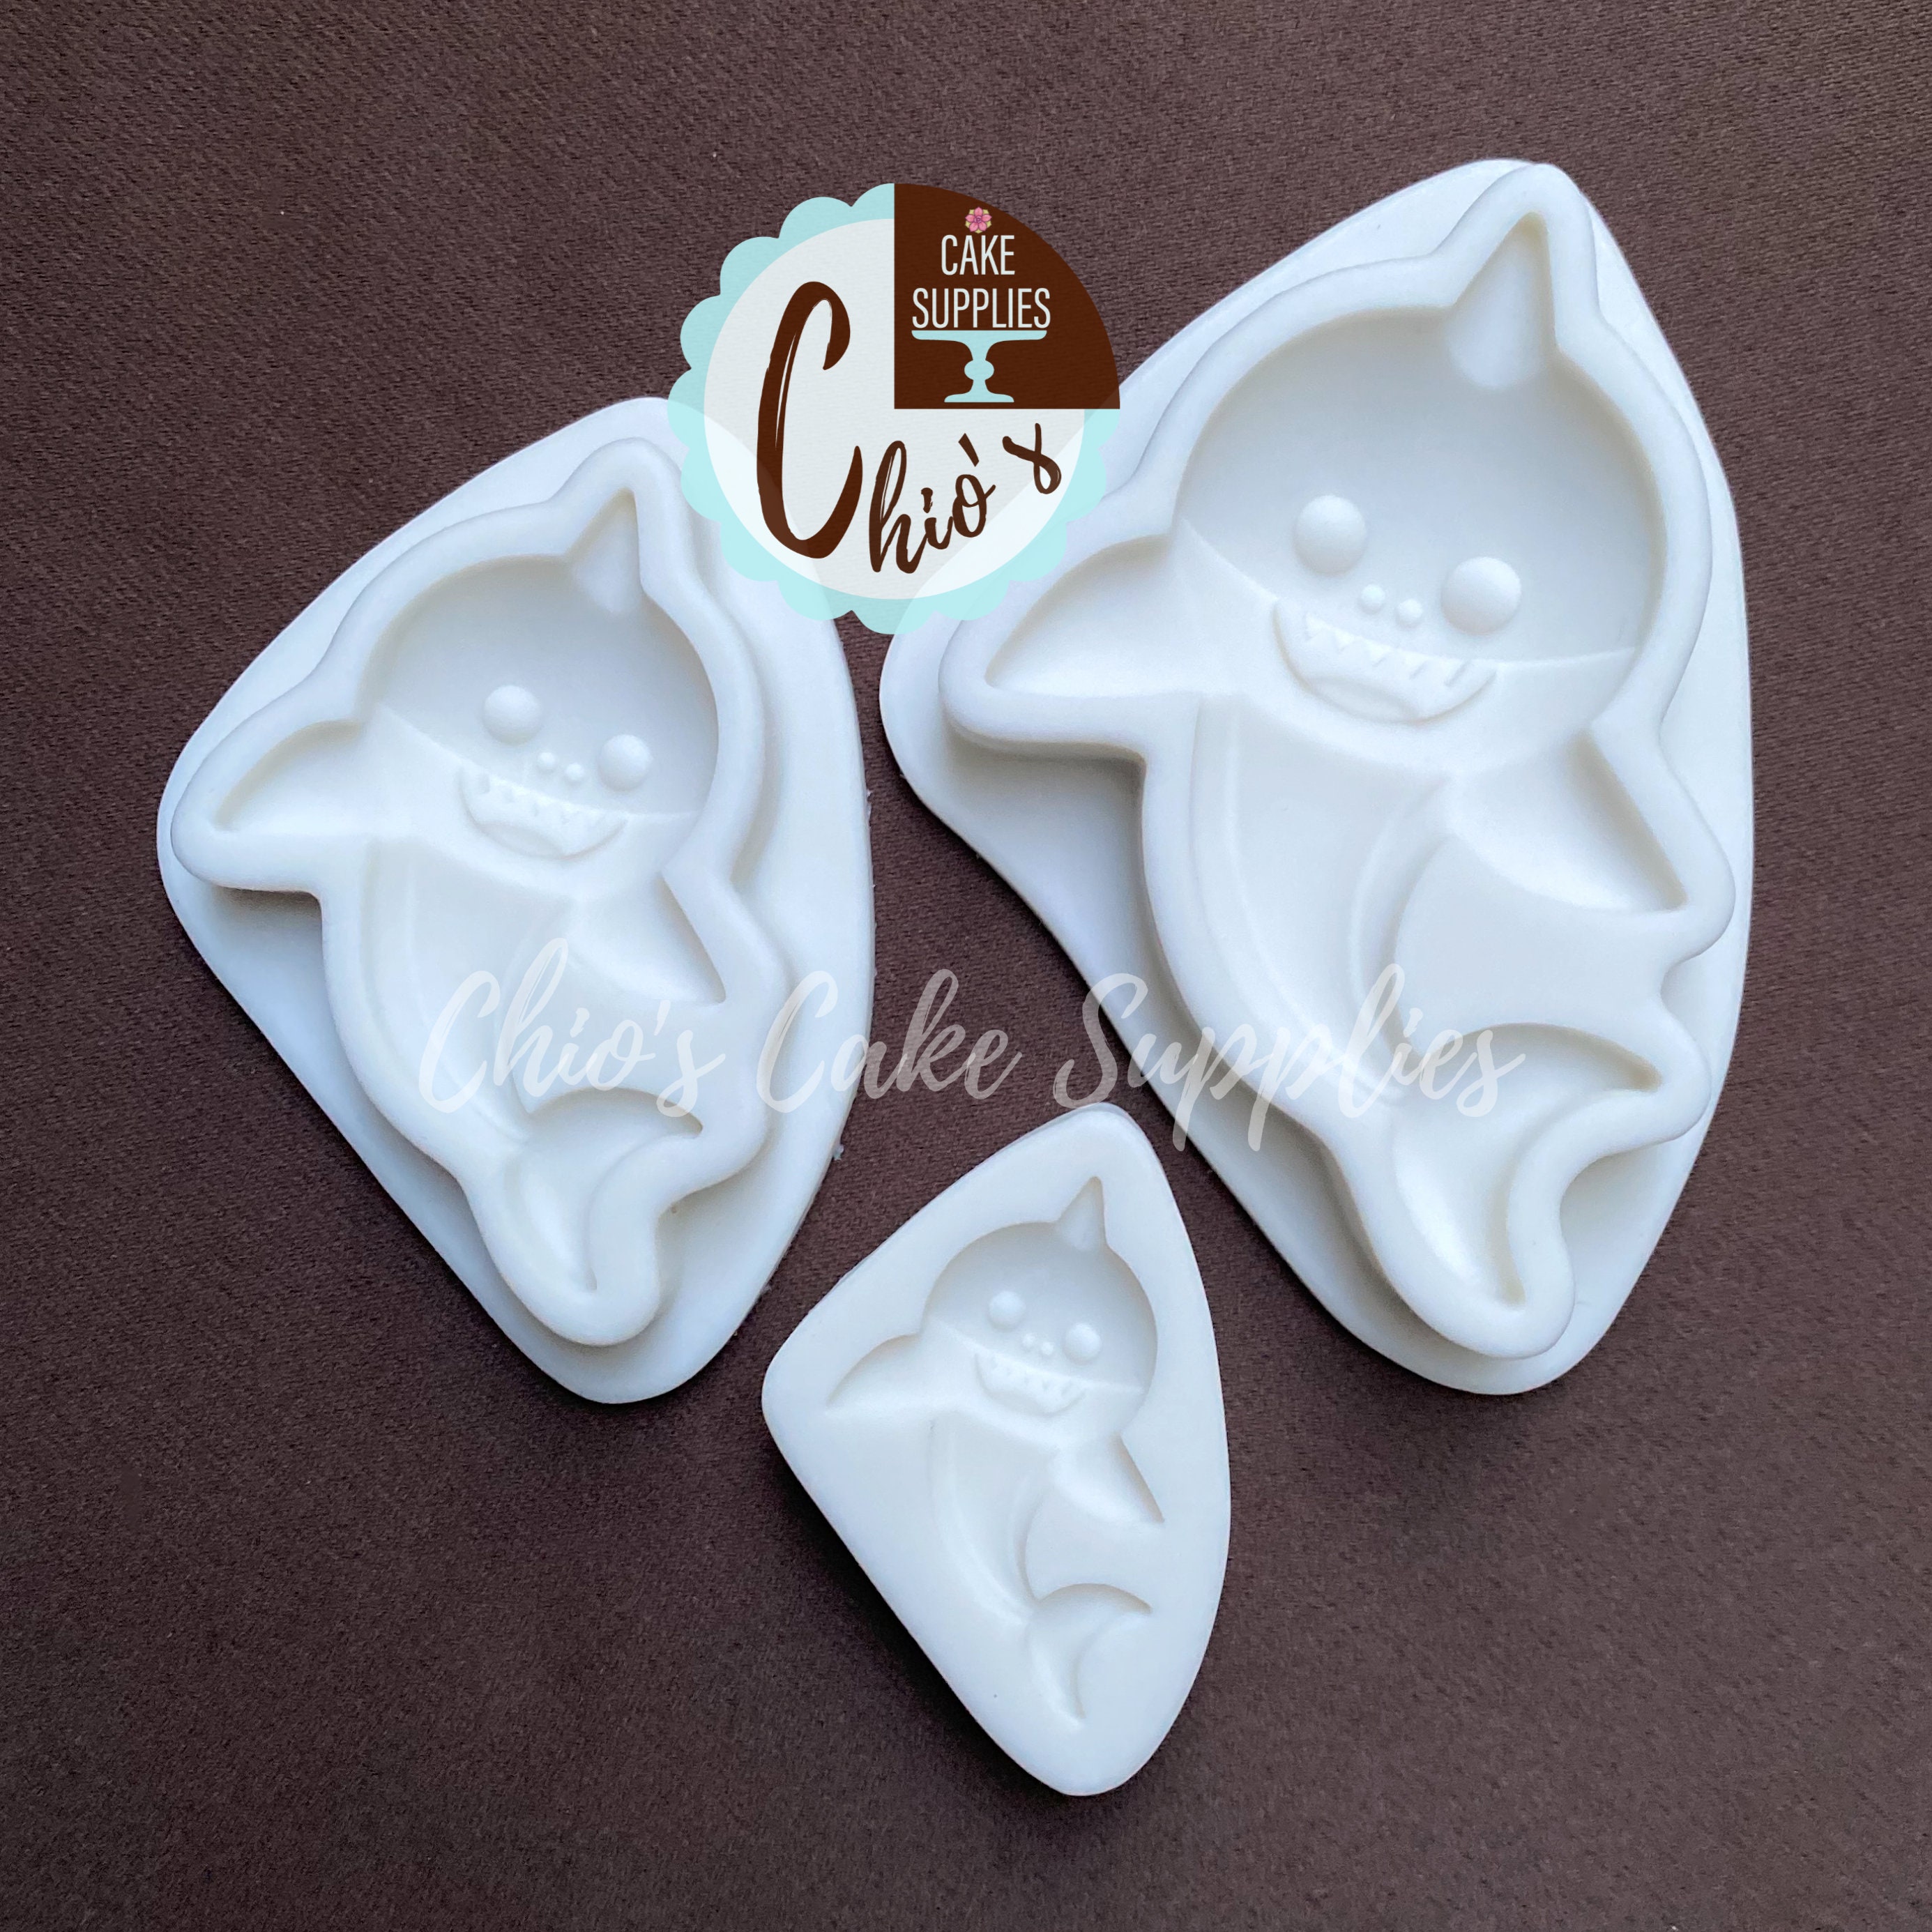 D-GROEE Silicone Chocolate Molds, Reusable Candy Baking Mold Ice Cube Trays  Candies Making Supplies for Chocolates Hard Candy Cake Decoration Soap